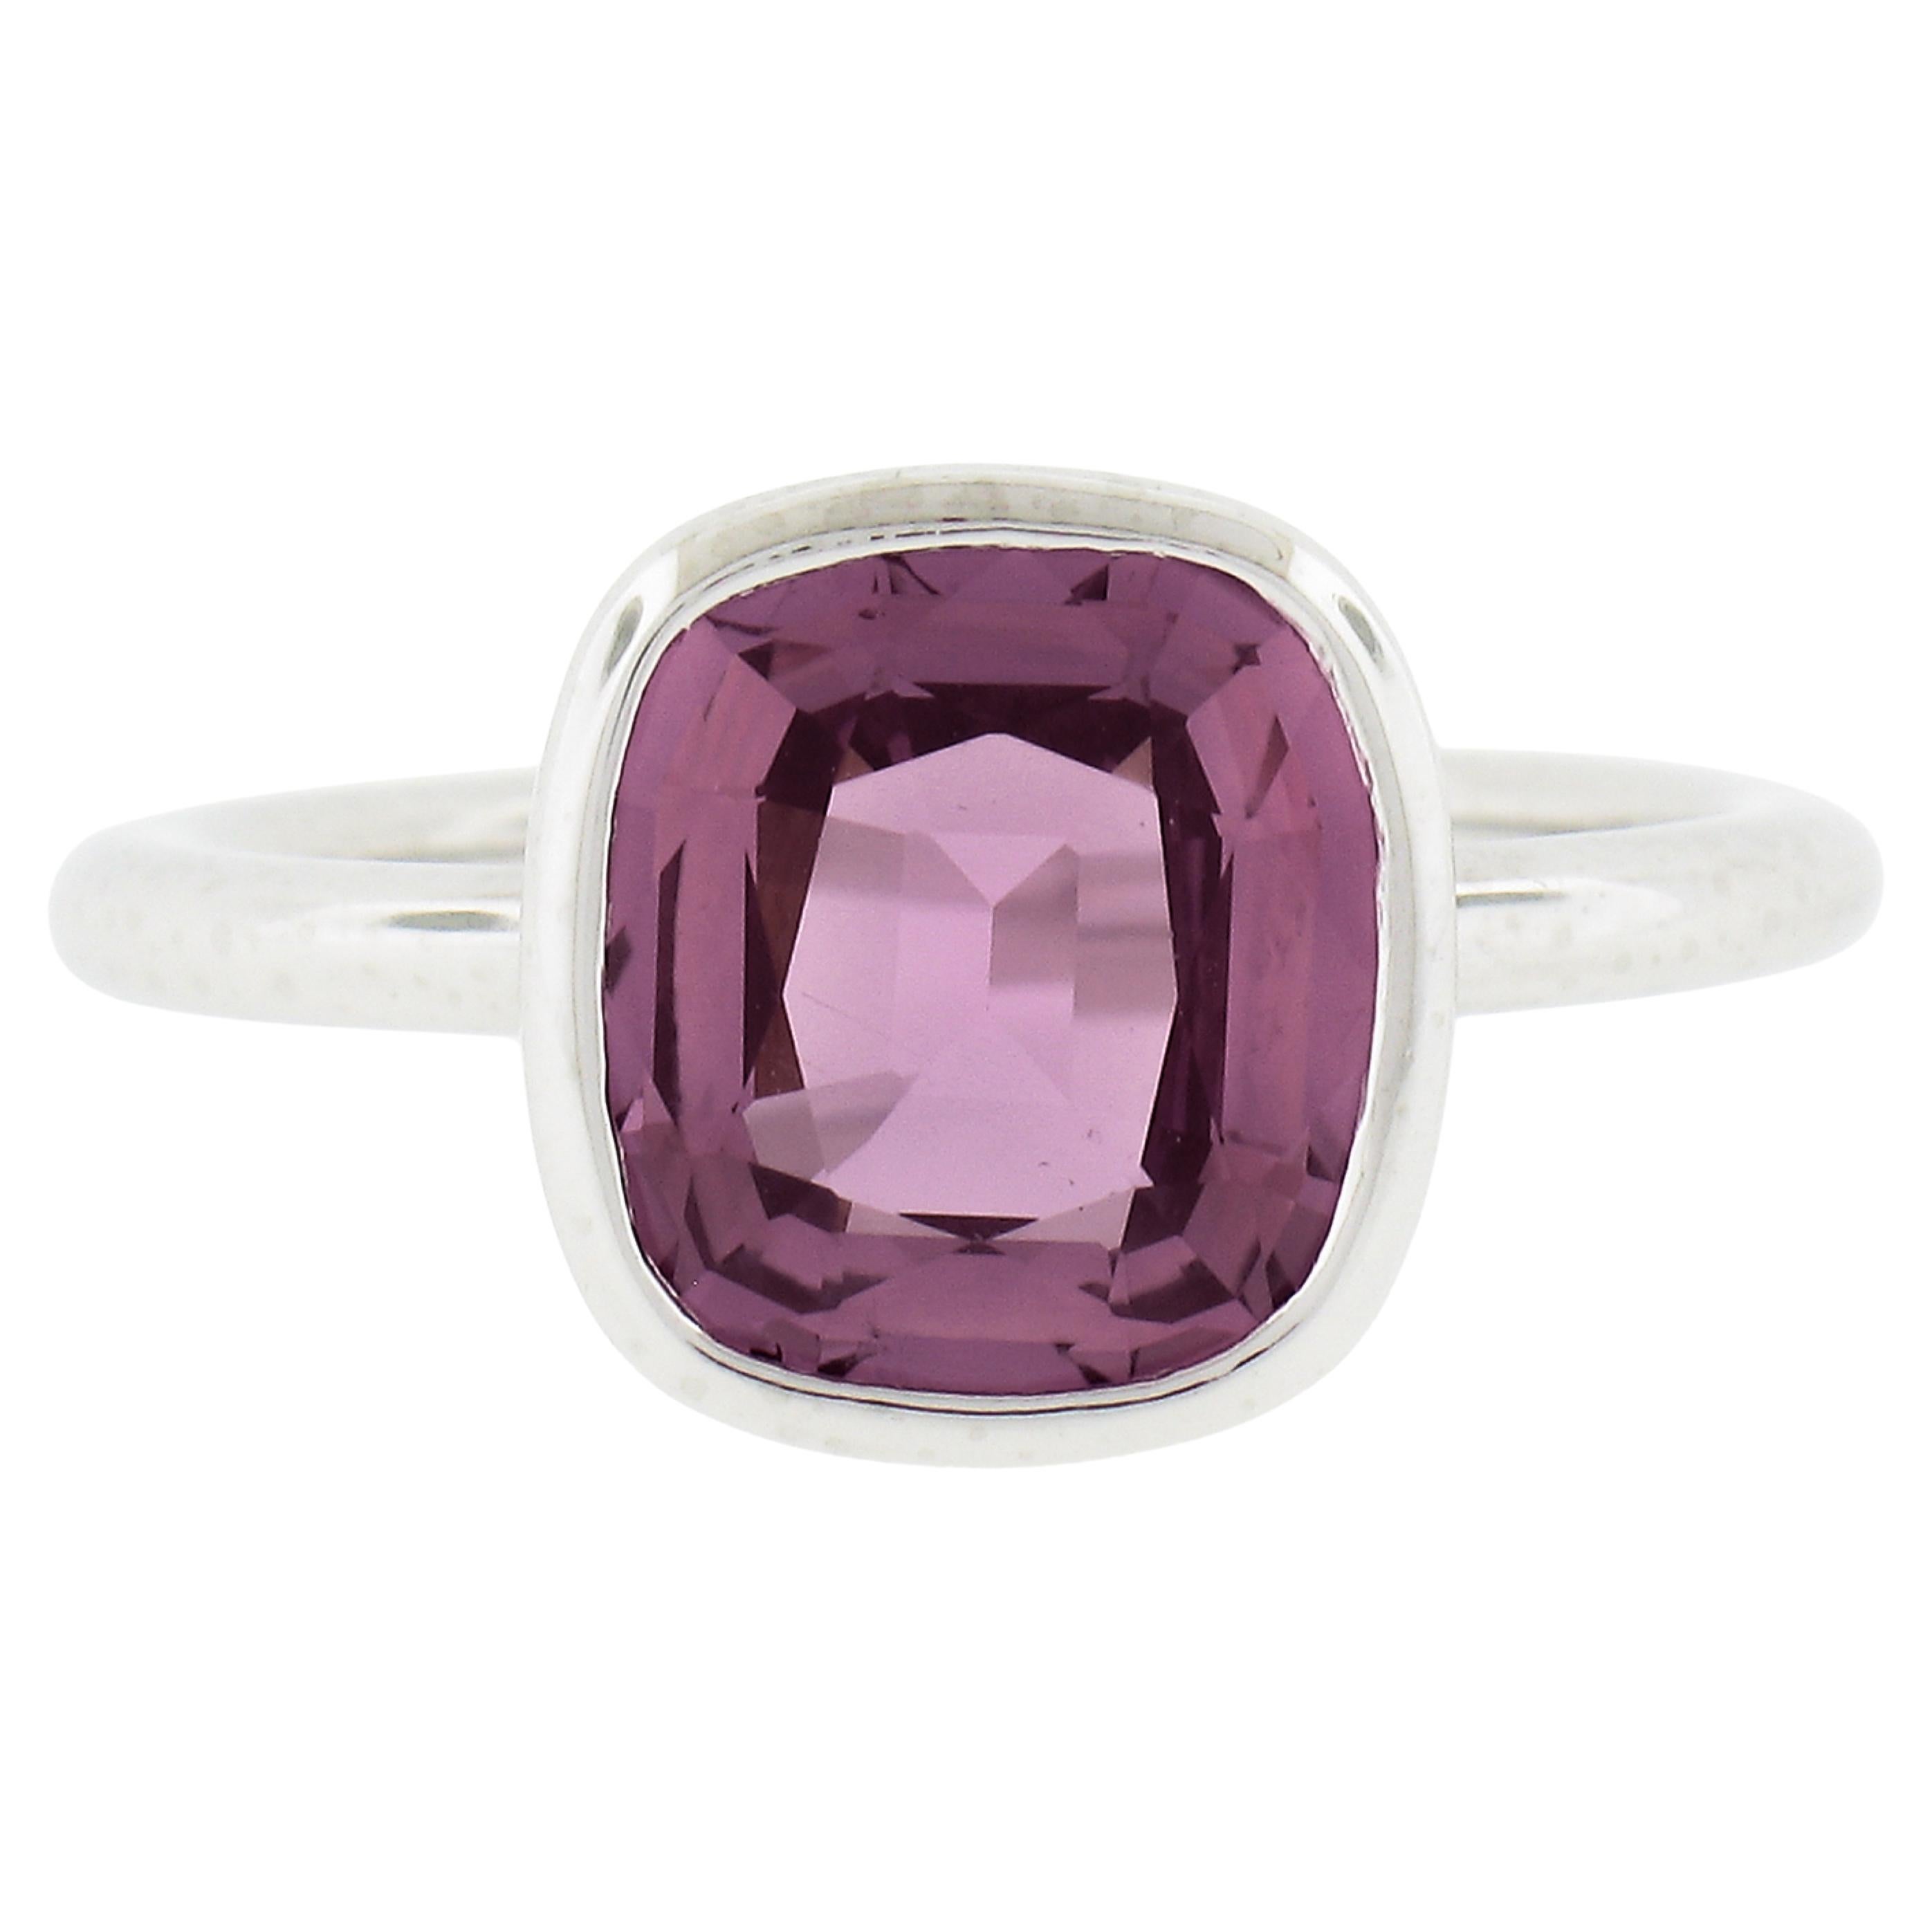 NEW Platinum GIA Graded 2.89ct Bezel Set Purple Pink Sapphire Solitaire Ring For Sale